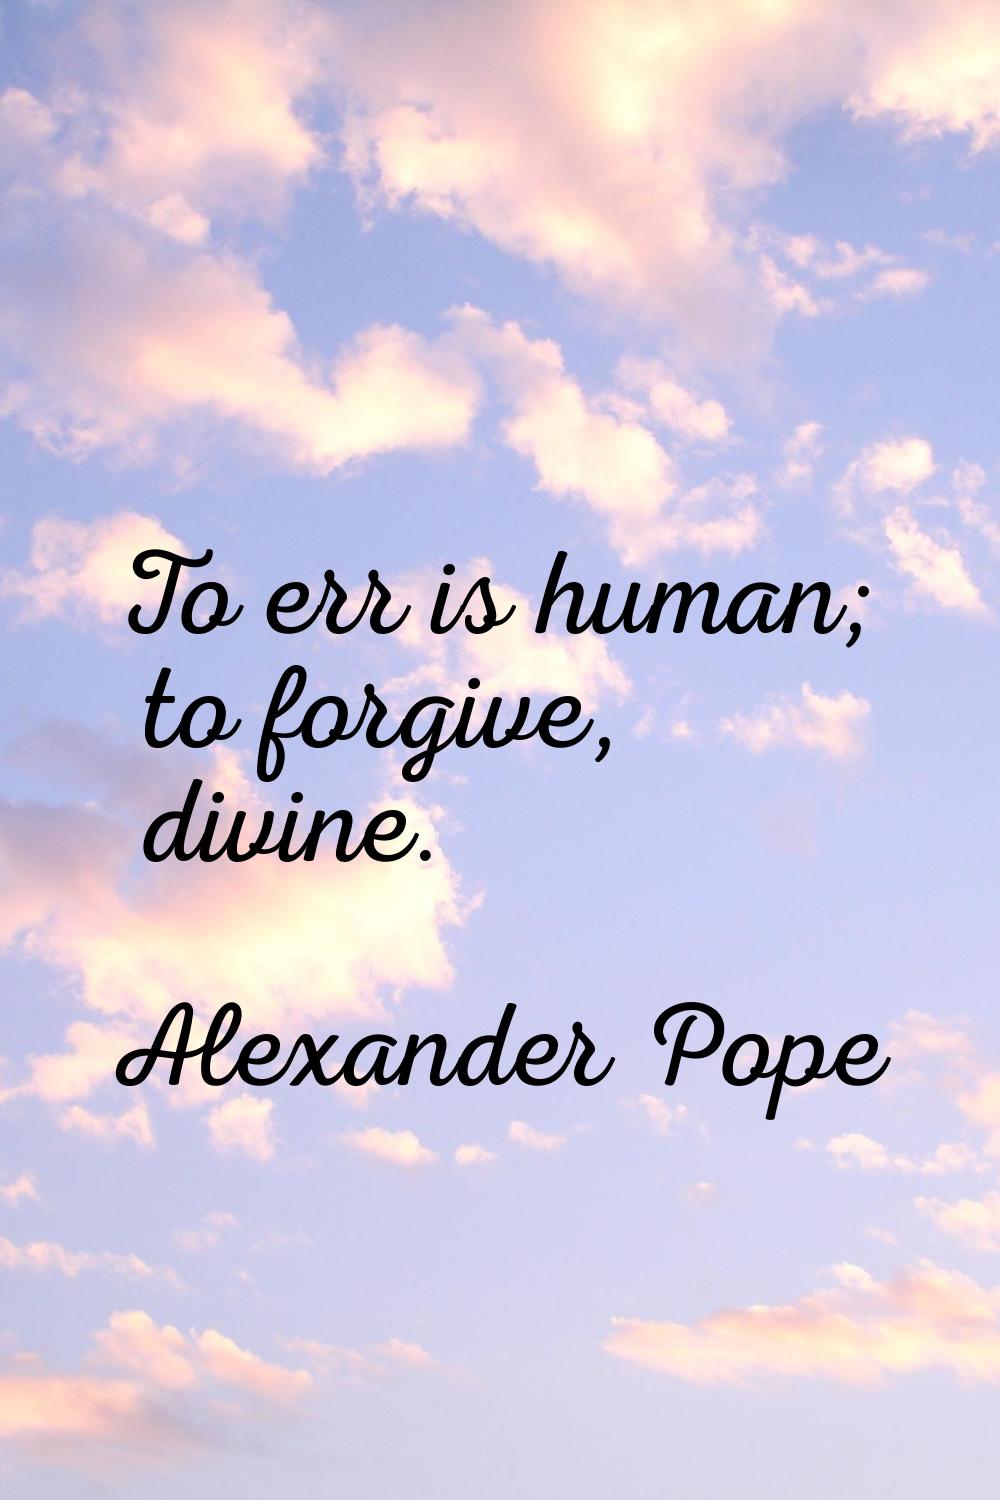 To err is human; to forgive, divine.